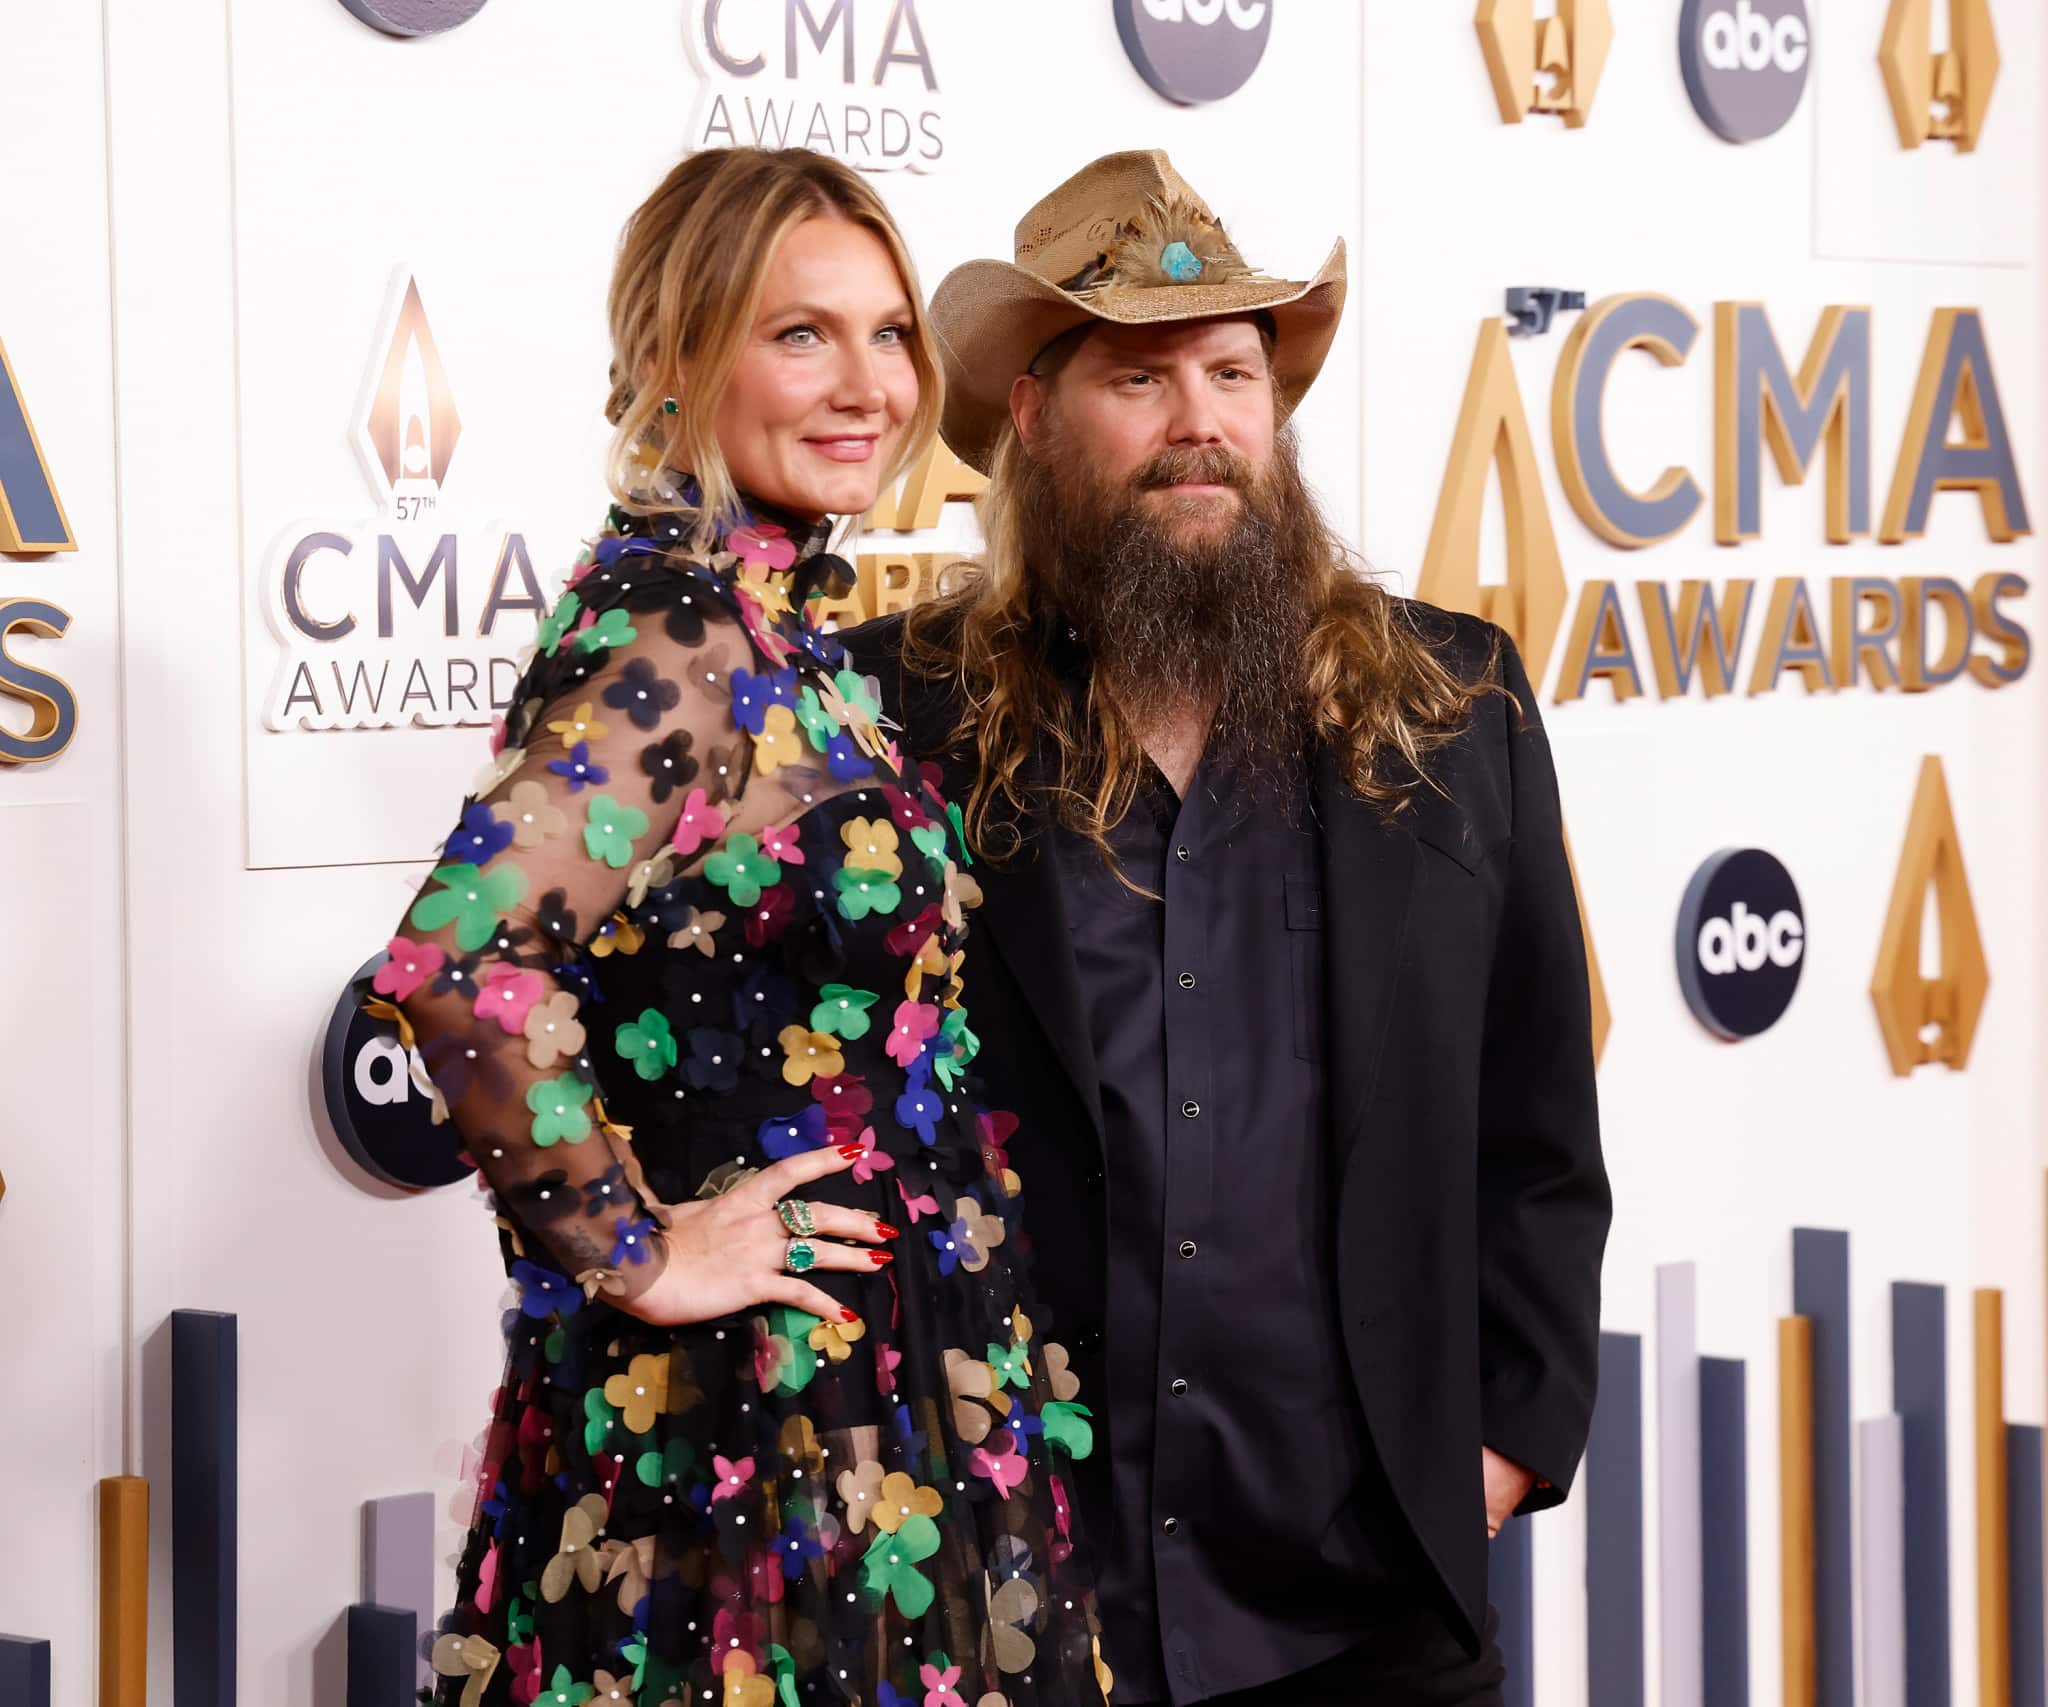 Chris Stapleton shared his key to a happy marriage with his wife, Morgane